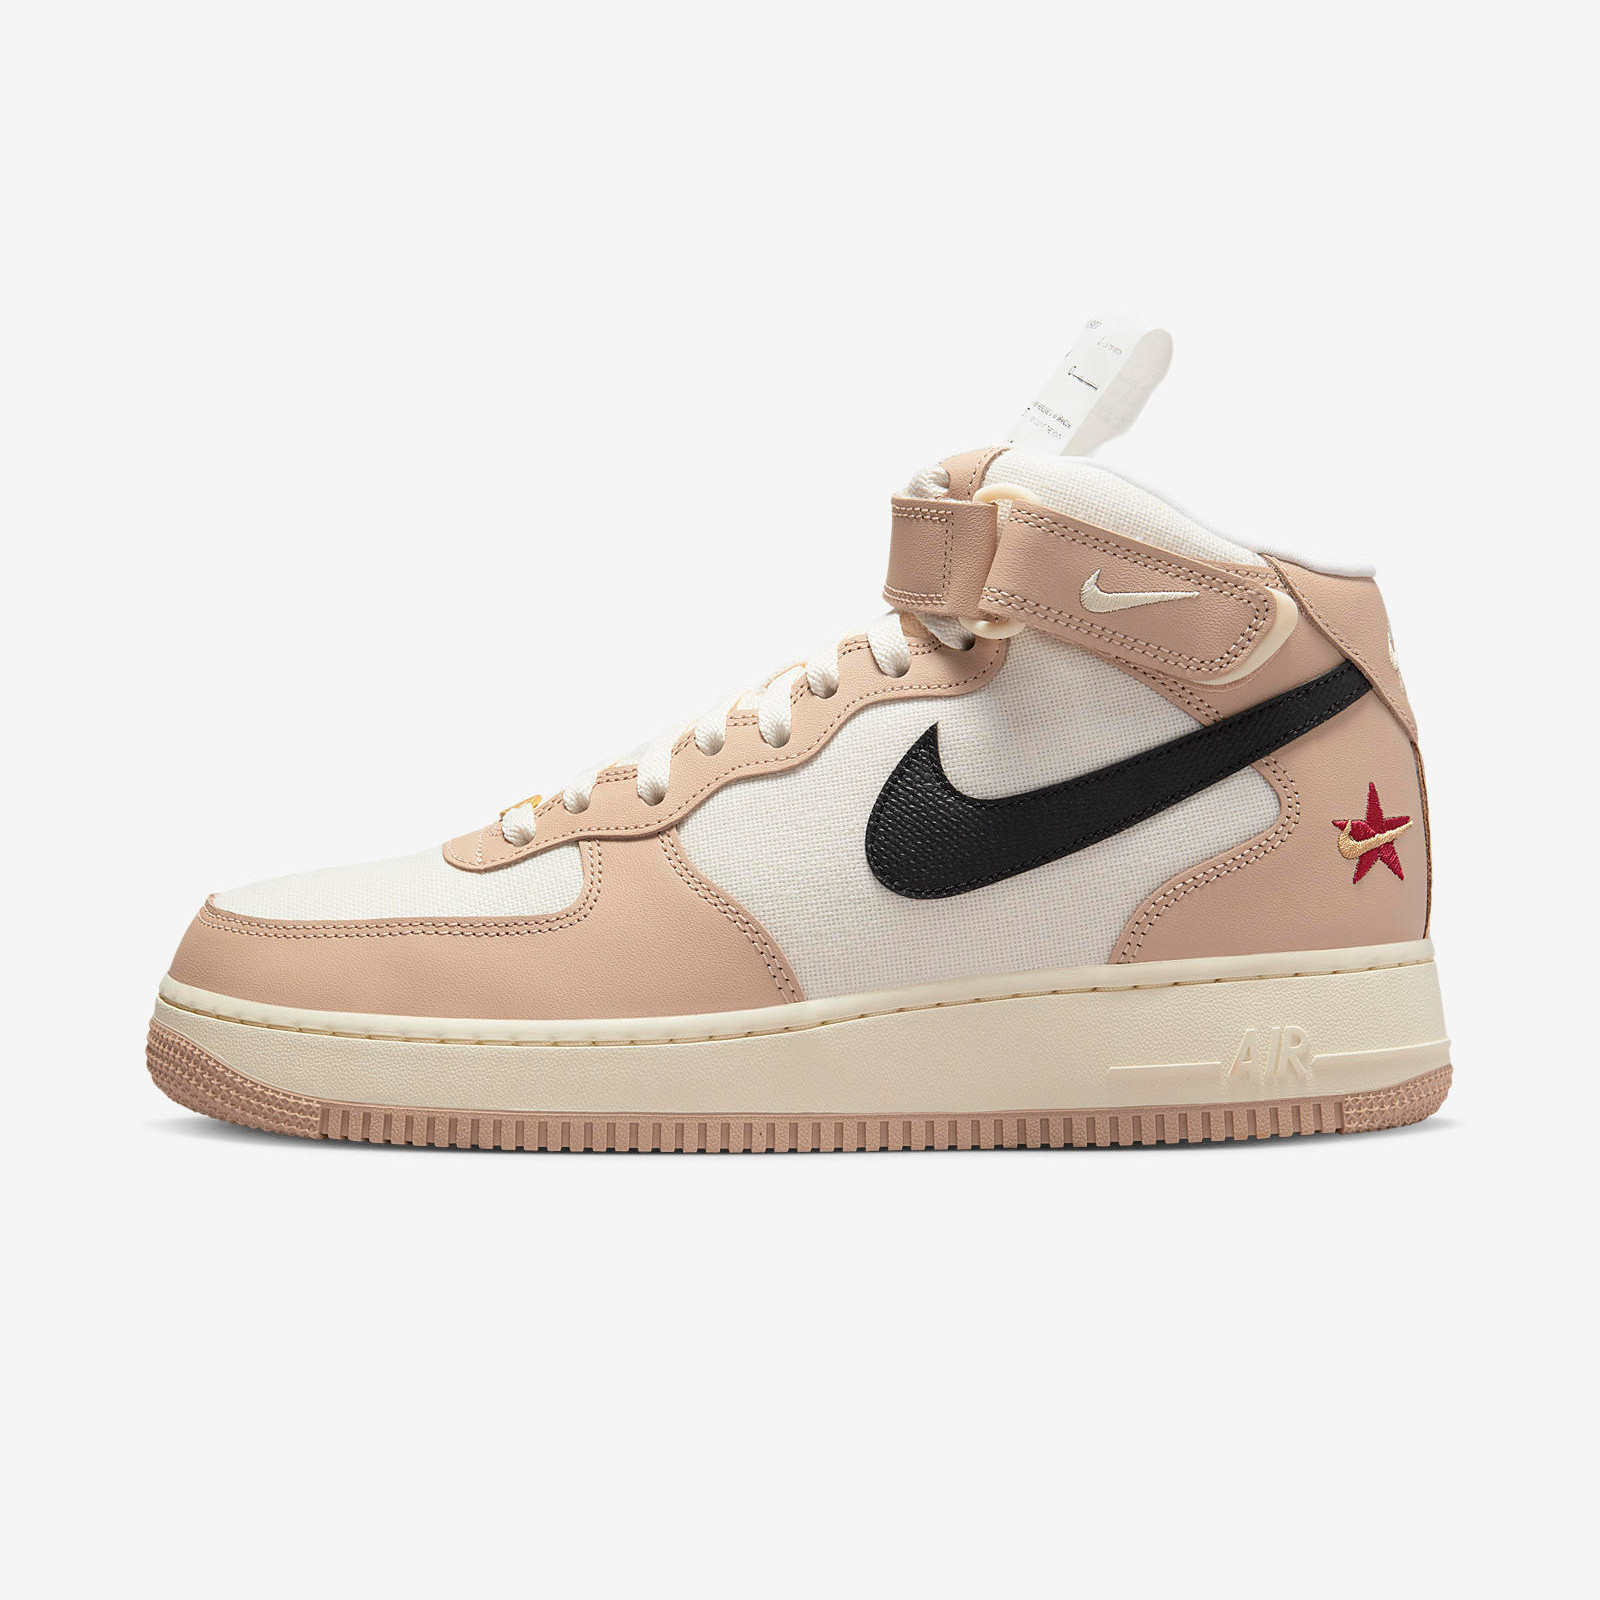 Nike Air Force 1 Mid
« Pale Ivory »